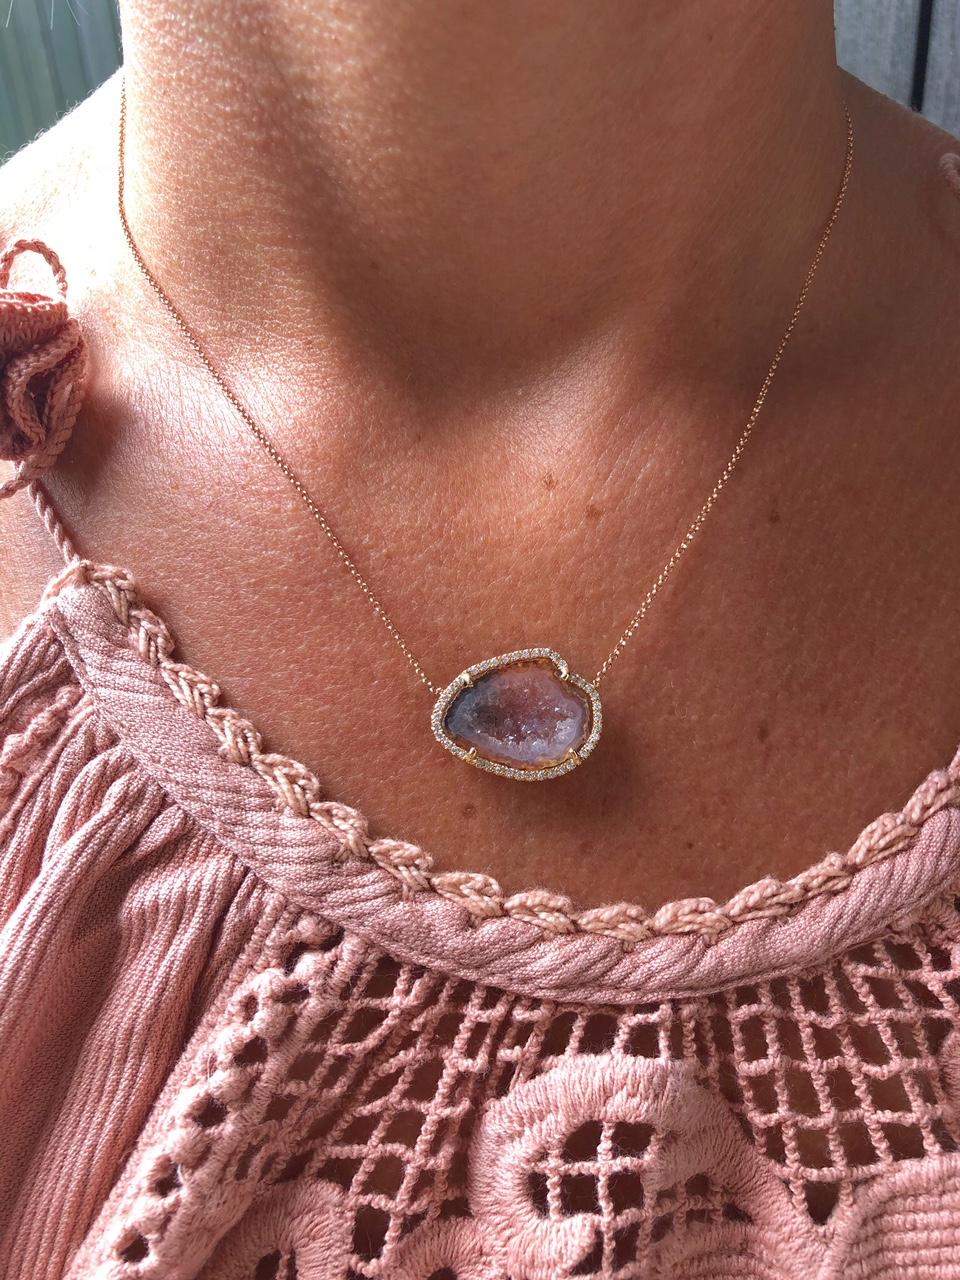 This 18 k rose gold Peach Agate pendant has 0.24 ct of dazzling diamonds.
This is the perfect gift for yourself or a special person.
The chain is attached and is 45 cm and adjustable with a sliding ball system.